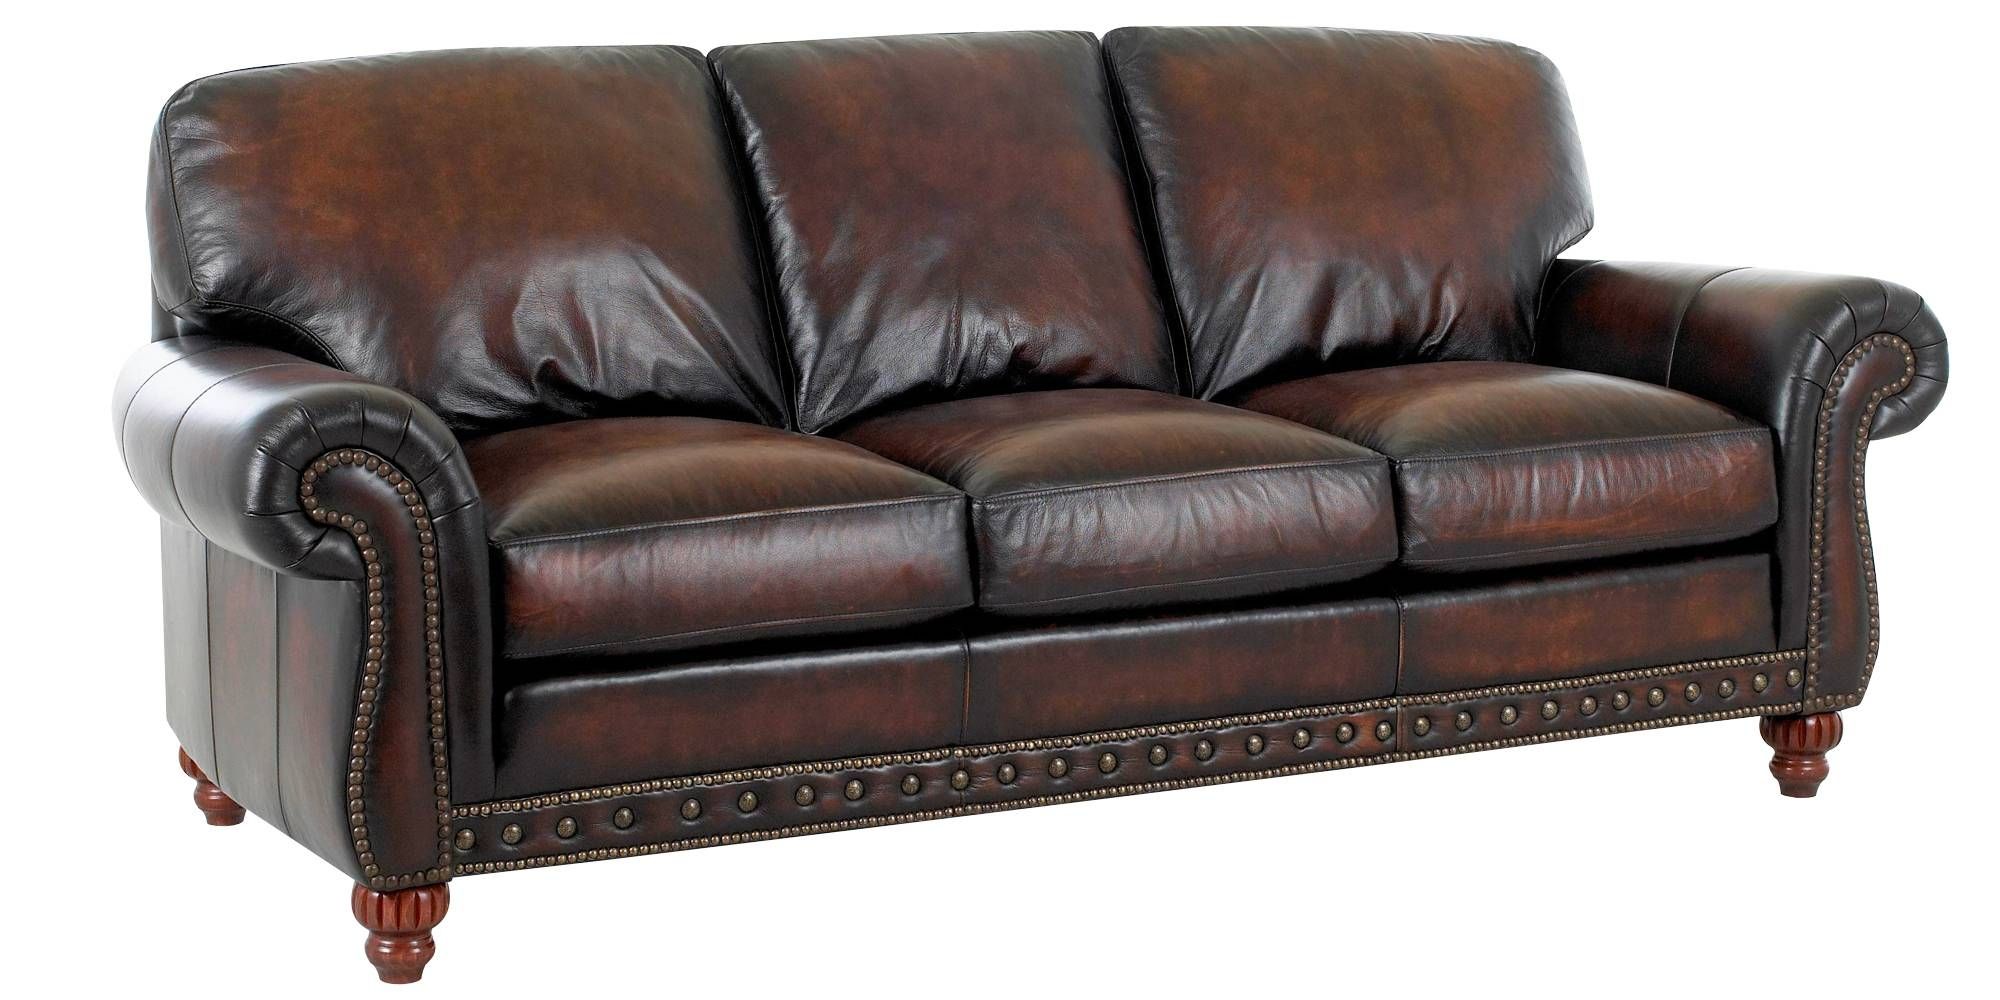 Traditional European Old World Leather Sofa Set | Club Furniture For European Leather Sofas (View 24 of 30)